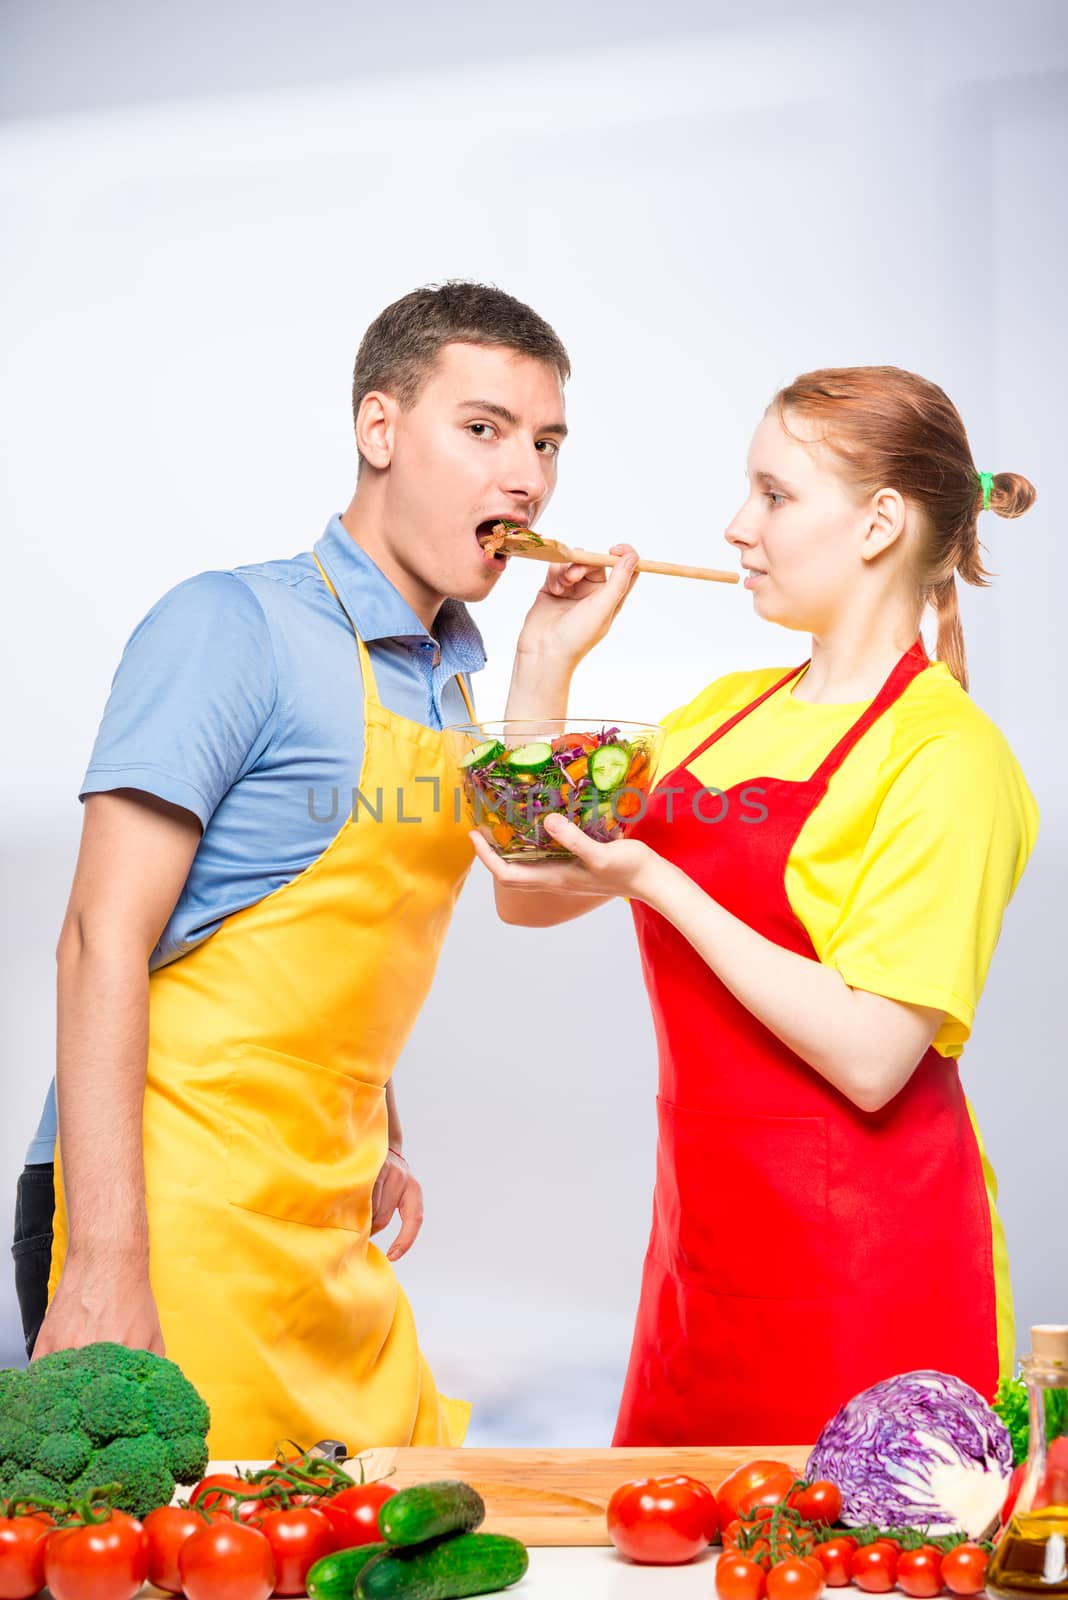 wife treats a man with fresh vegetable salad, a pair of aprons i by kosmsos111